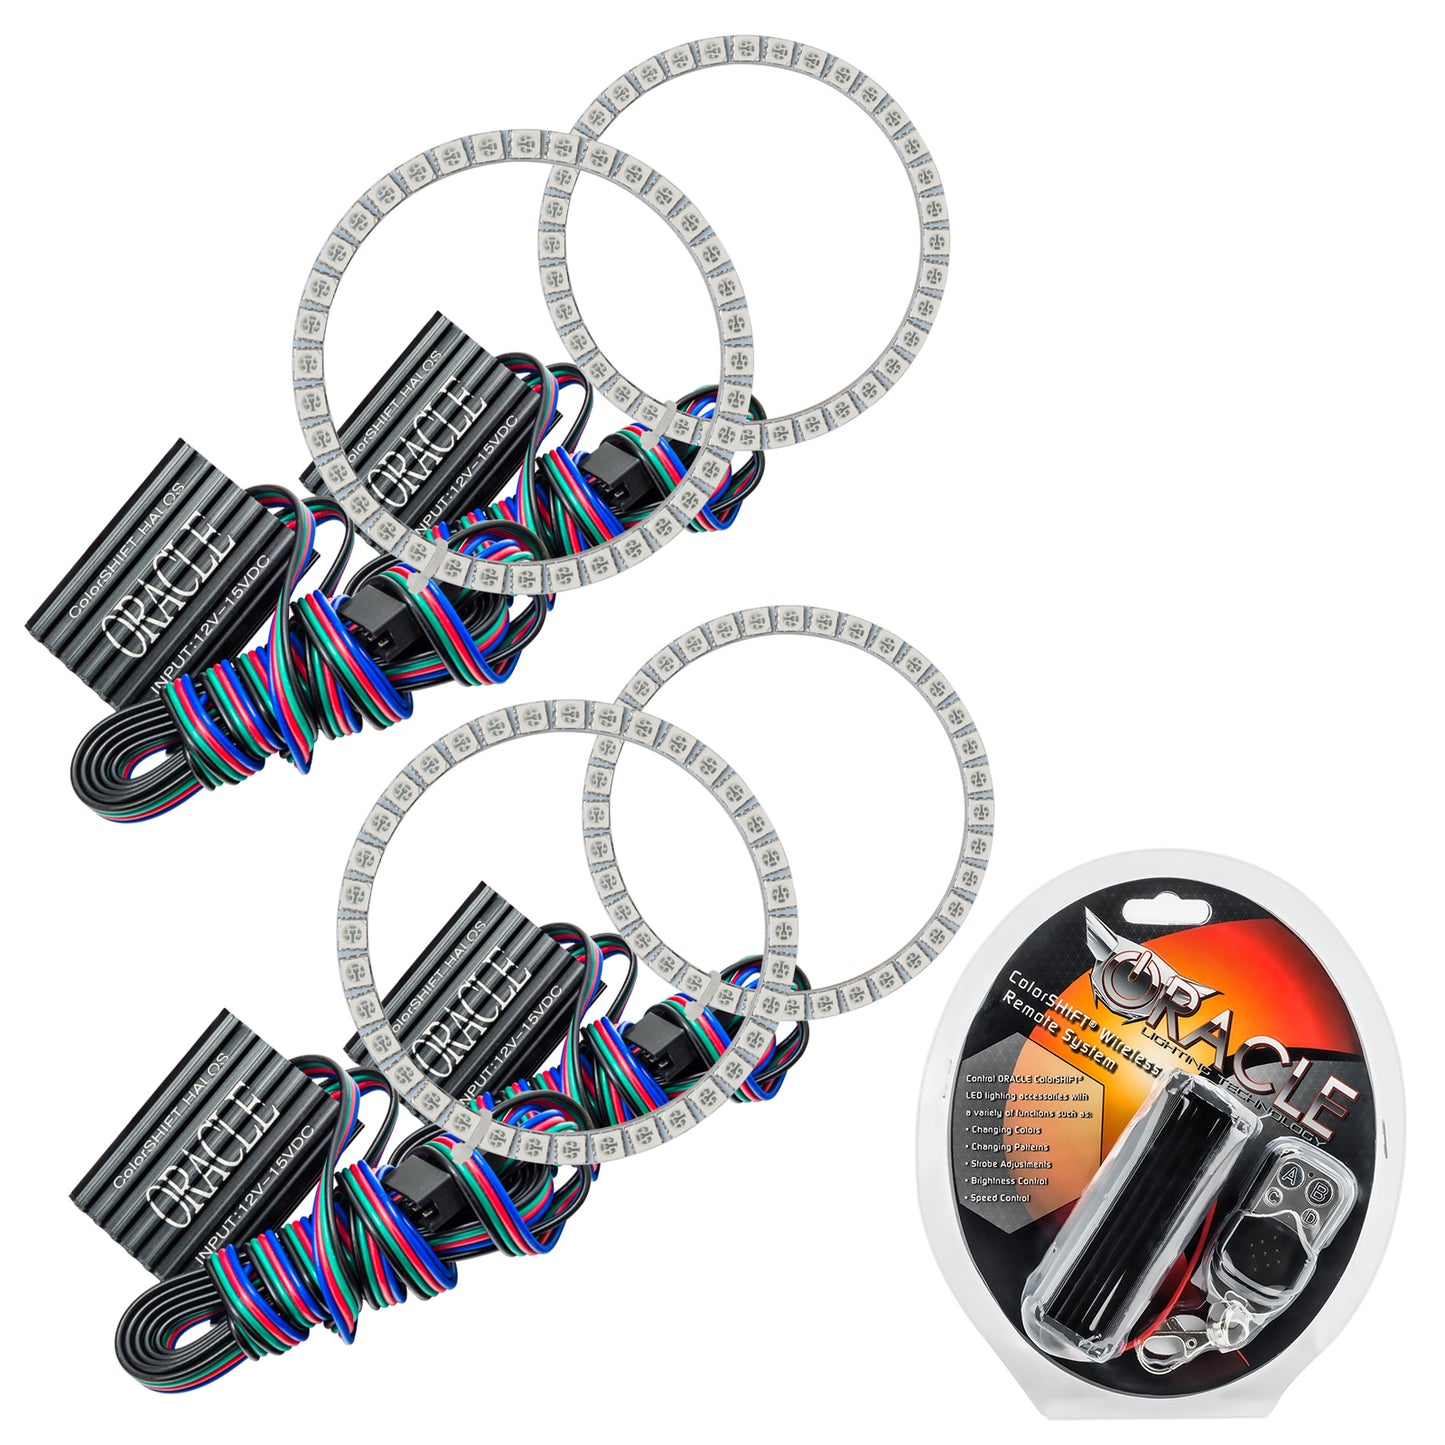 Oracle Lighting 2380-330 - Nissan 370 Z 2009-2017 ORACLE ColorSHIFT Dual Halo Kit